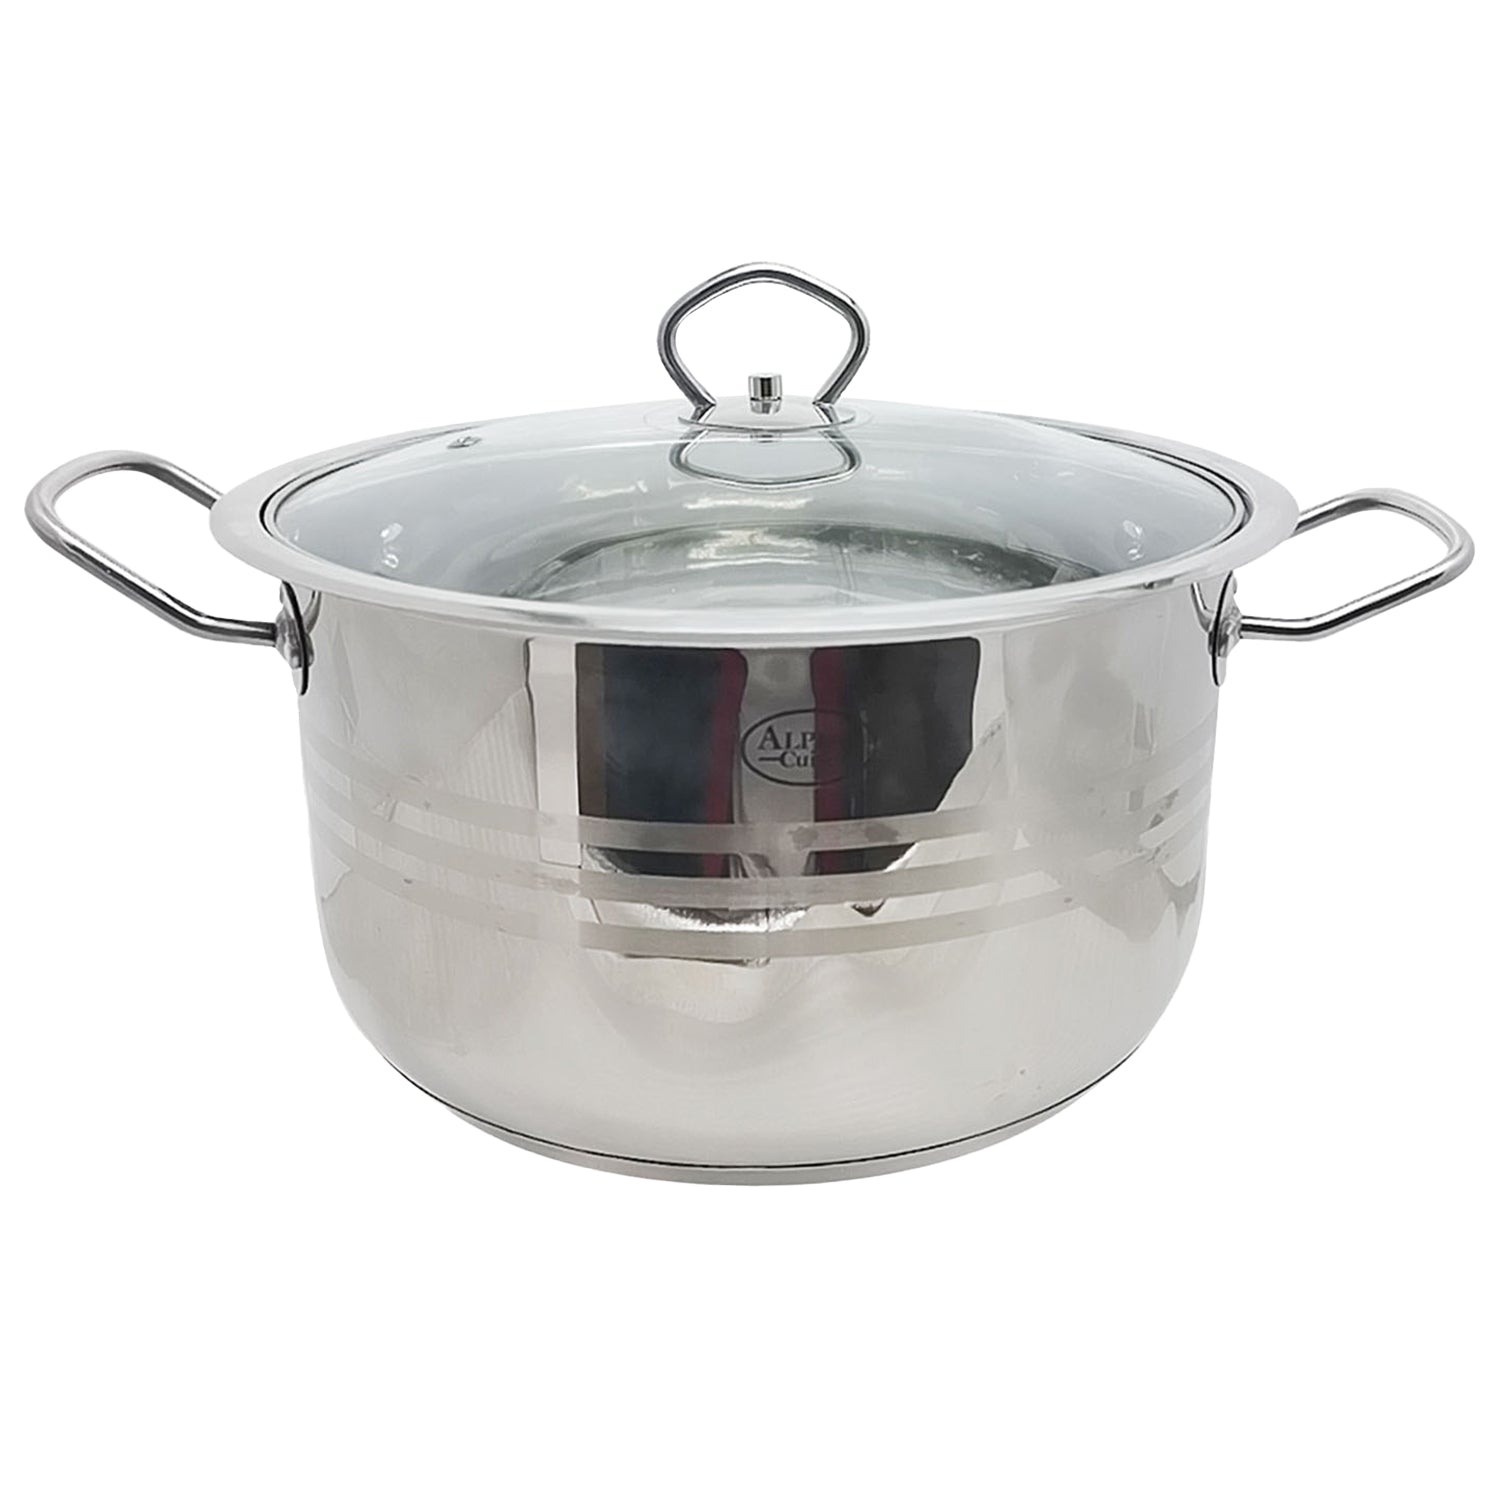 Alpine Cuisine 18 Quart Non-stick Stock Pot with Tempered Glass Lid and  Carrying Handles, Multi-Purpose Cookware Aluminum Dutch Oven for Braising